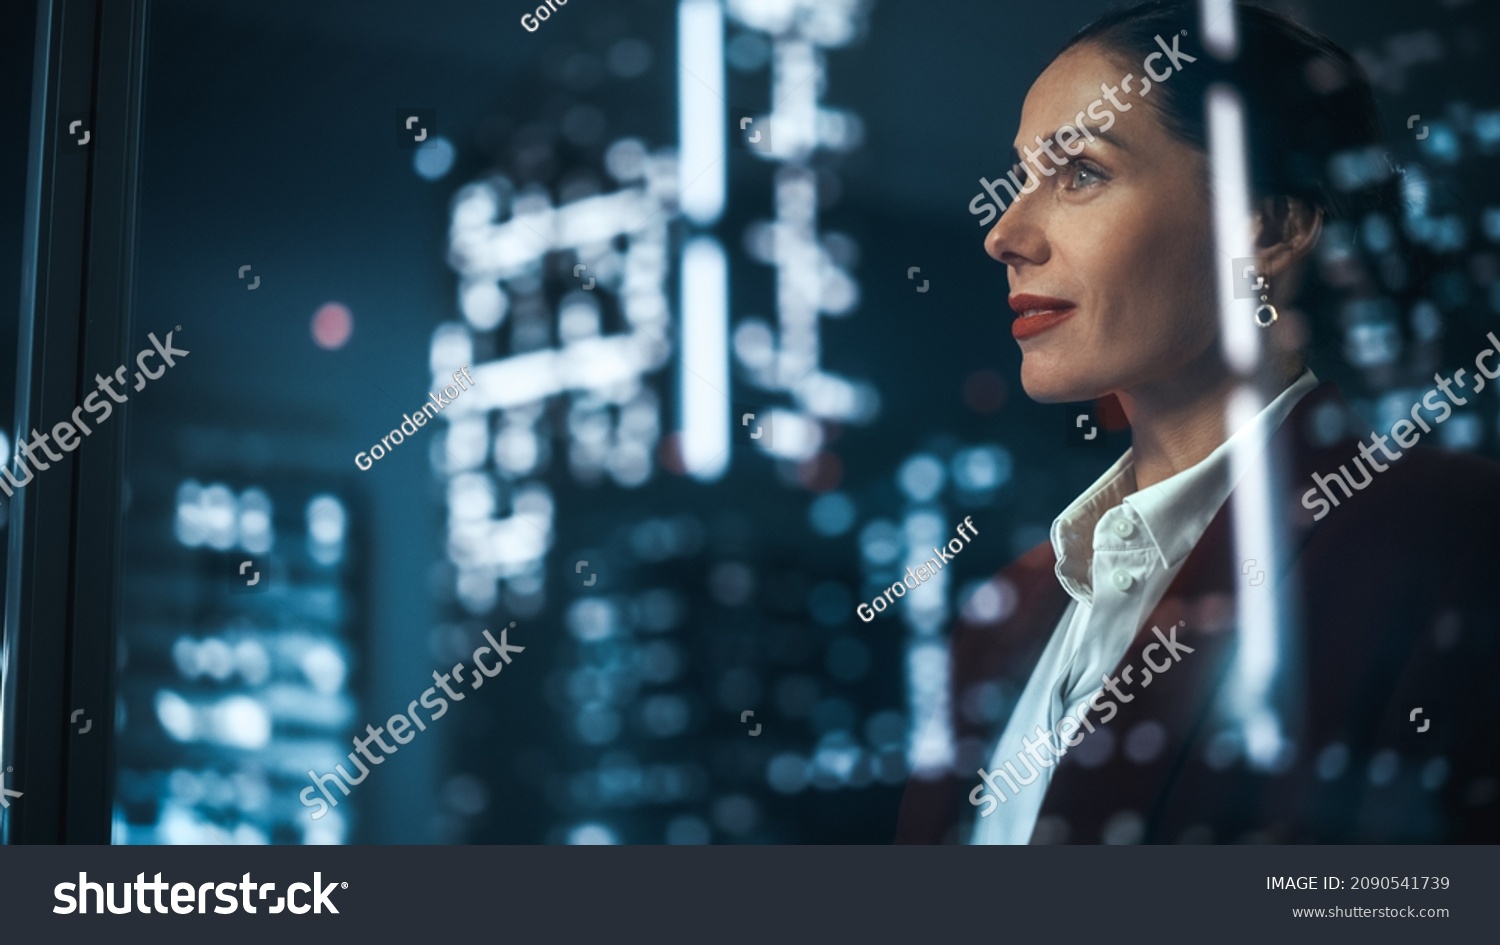 Successful Businesswoman in Stylish Suit Working on Top Floor Office Overlooking Night City. High Achievement Female CEO of Humanitarian Investment Fund, Human Face of Sustainable Corporate Governance #2090541739